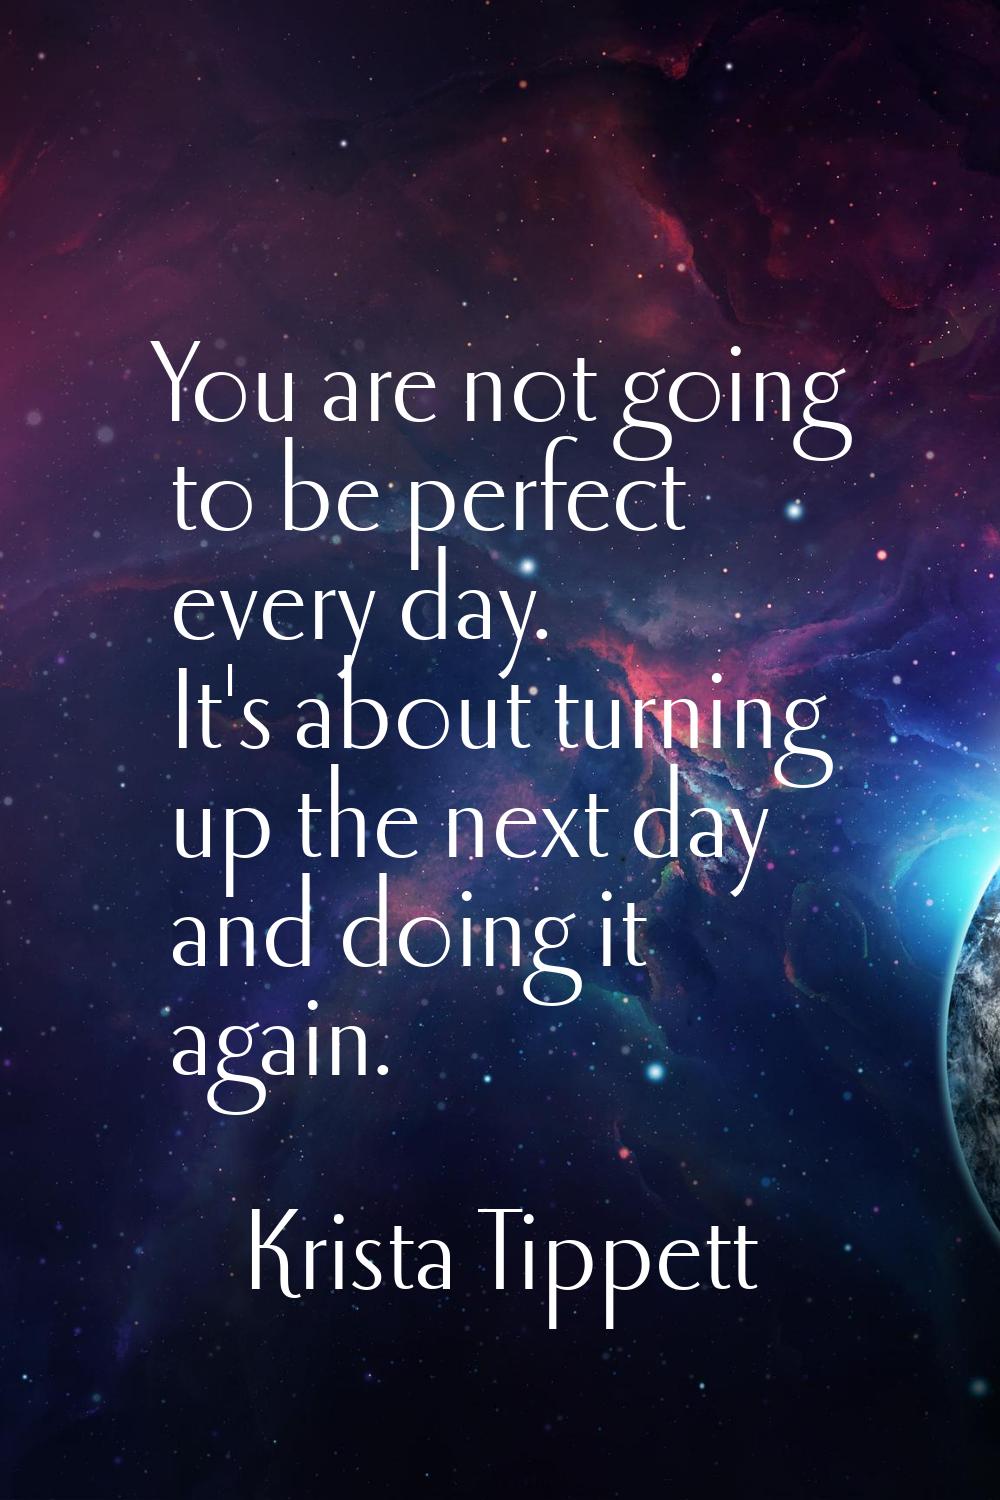 You are not going to be perfect every day. It's about turning up the next day and doing it again.